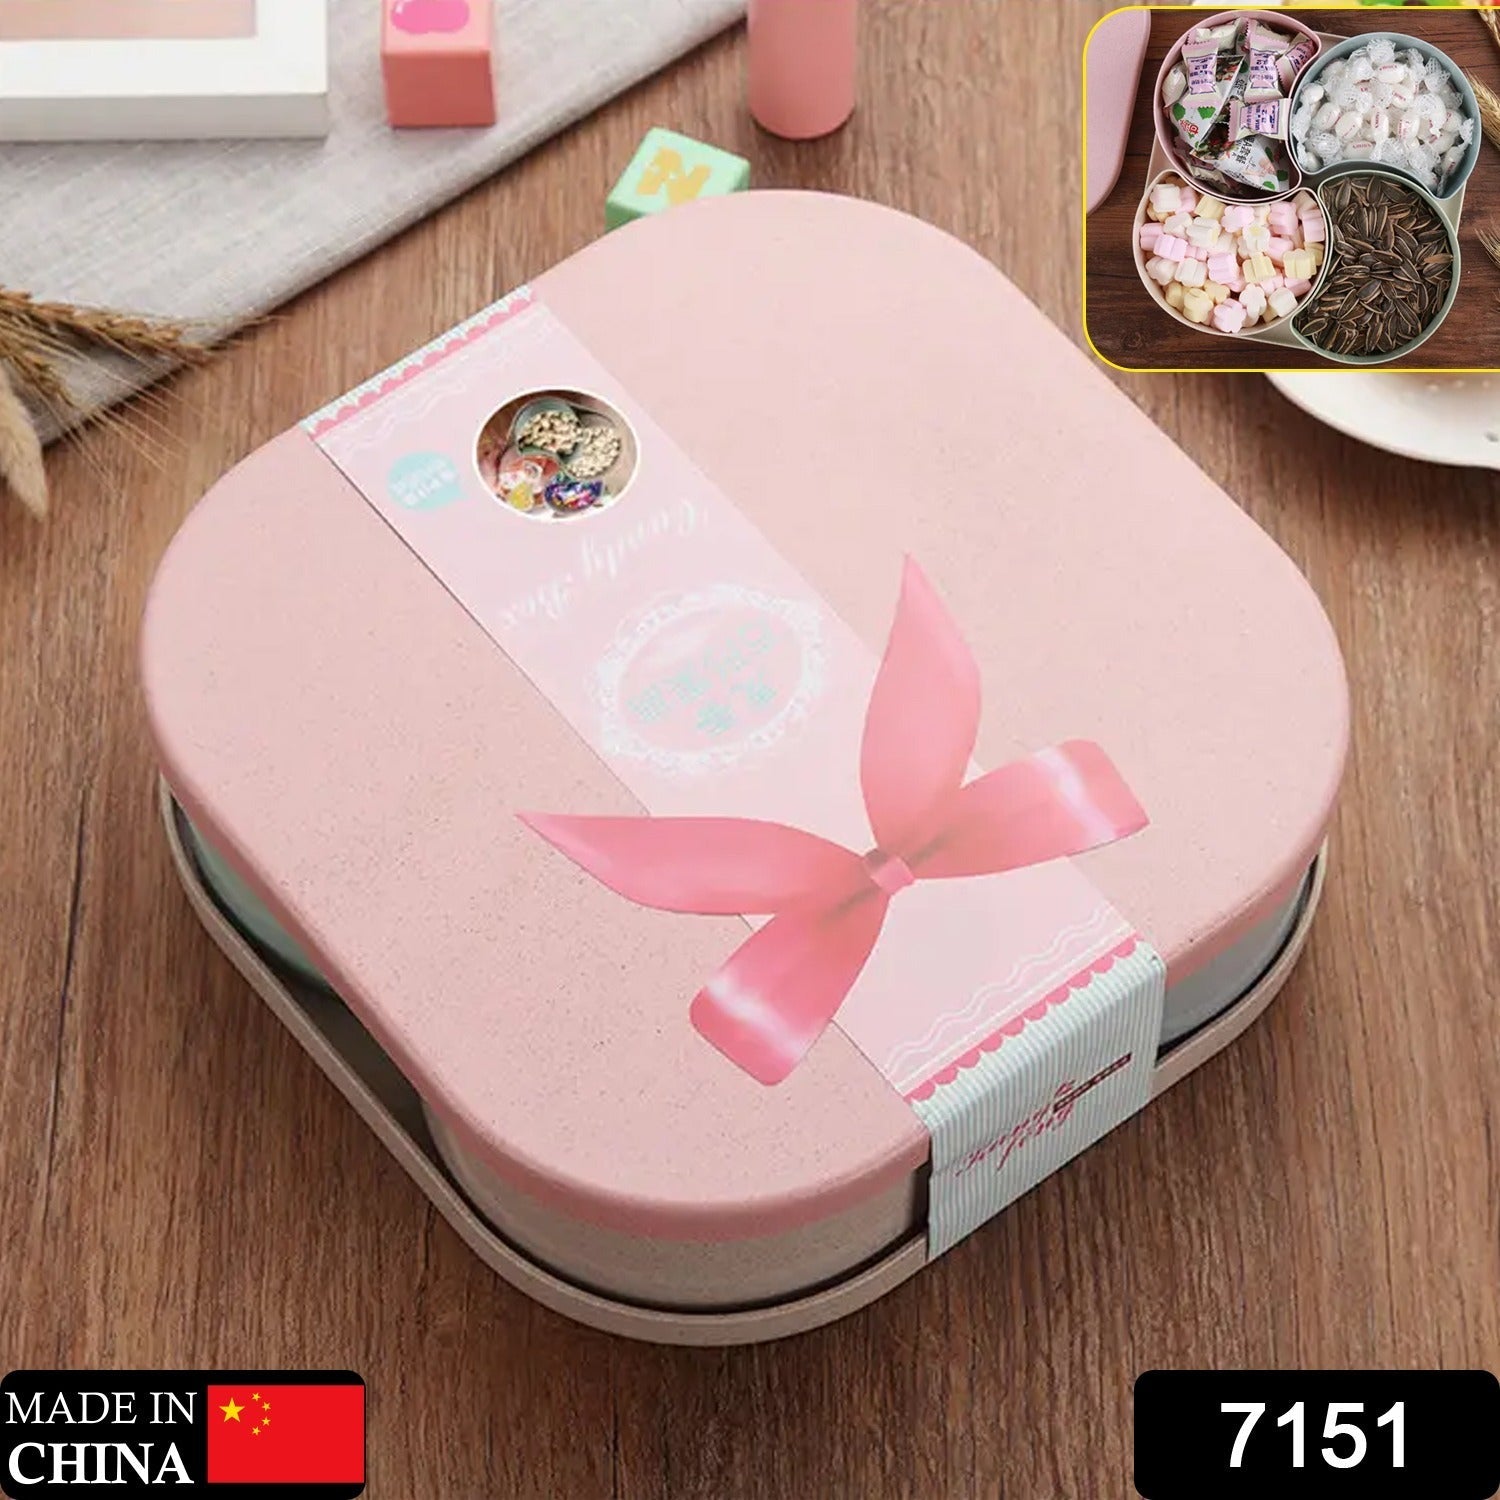 7151 Candy Box Large Capacity Space-saving Compartment Design Creative Divided Food Fruit Plate for Living Roomfruit_candy_box_4comp DeoDap